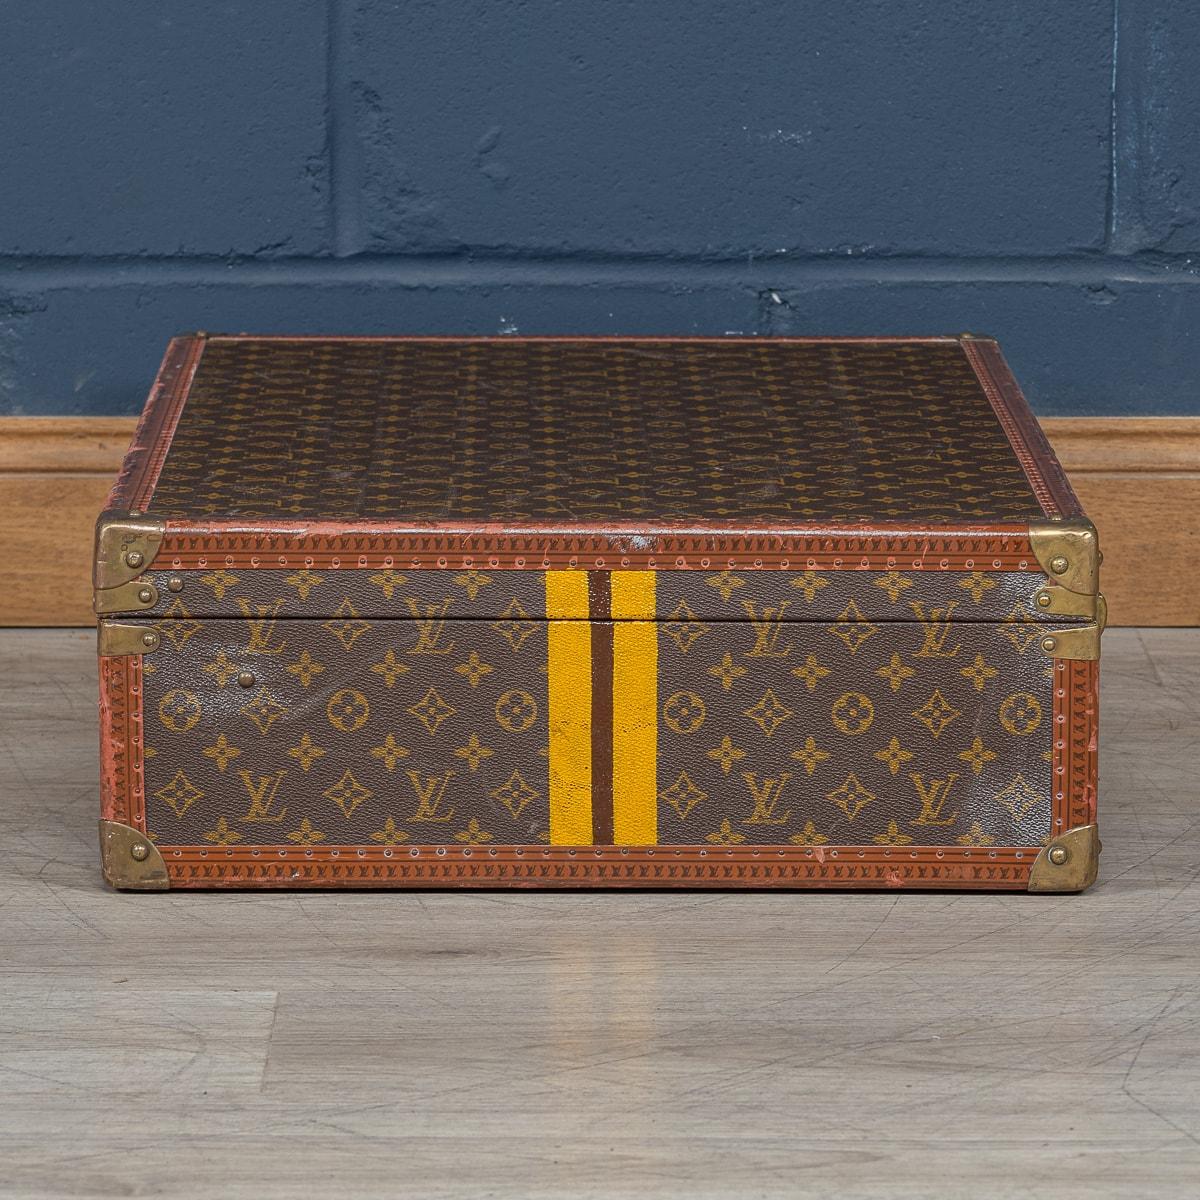 20th Century Louis Vuitton Suitcase In Monogram Canvas, France c.1970 In Good Condition For Sale In Royal Tunbridge Wells, Kent